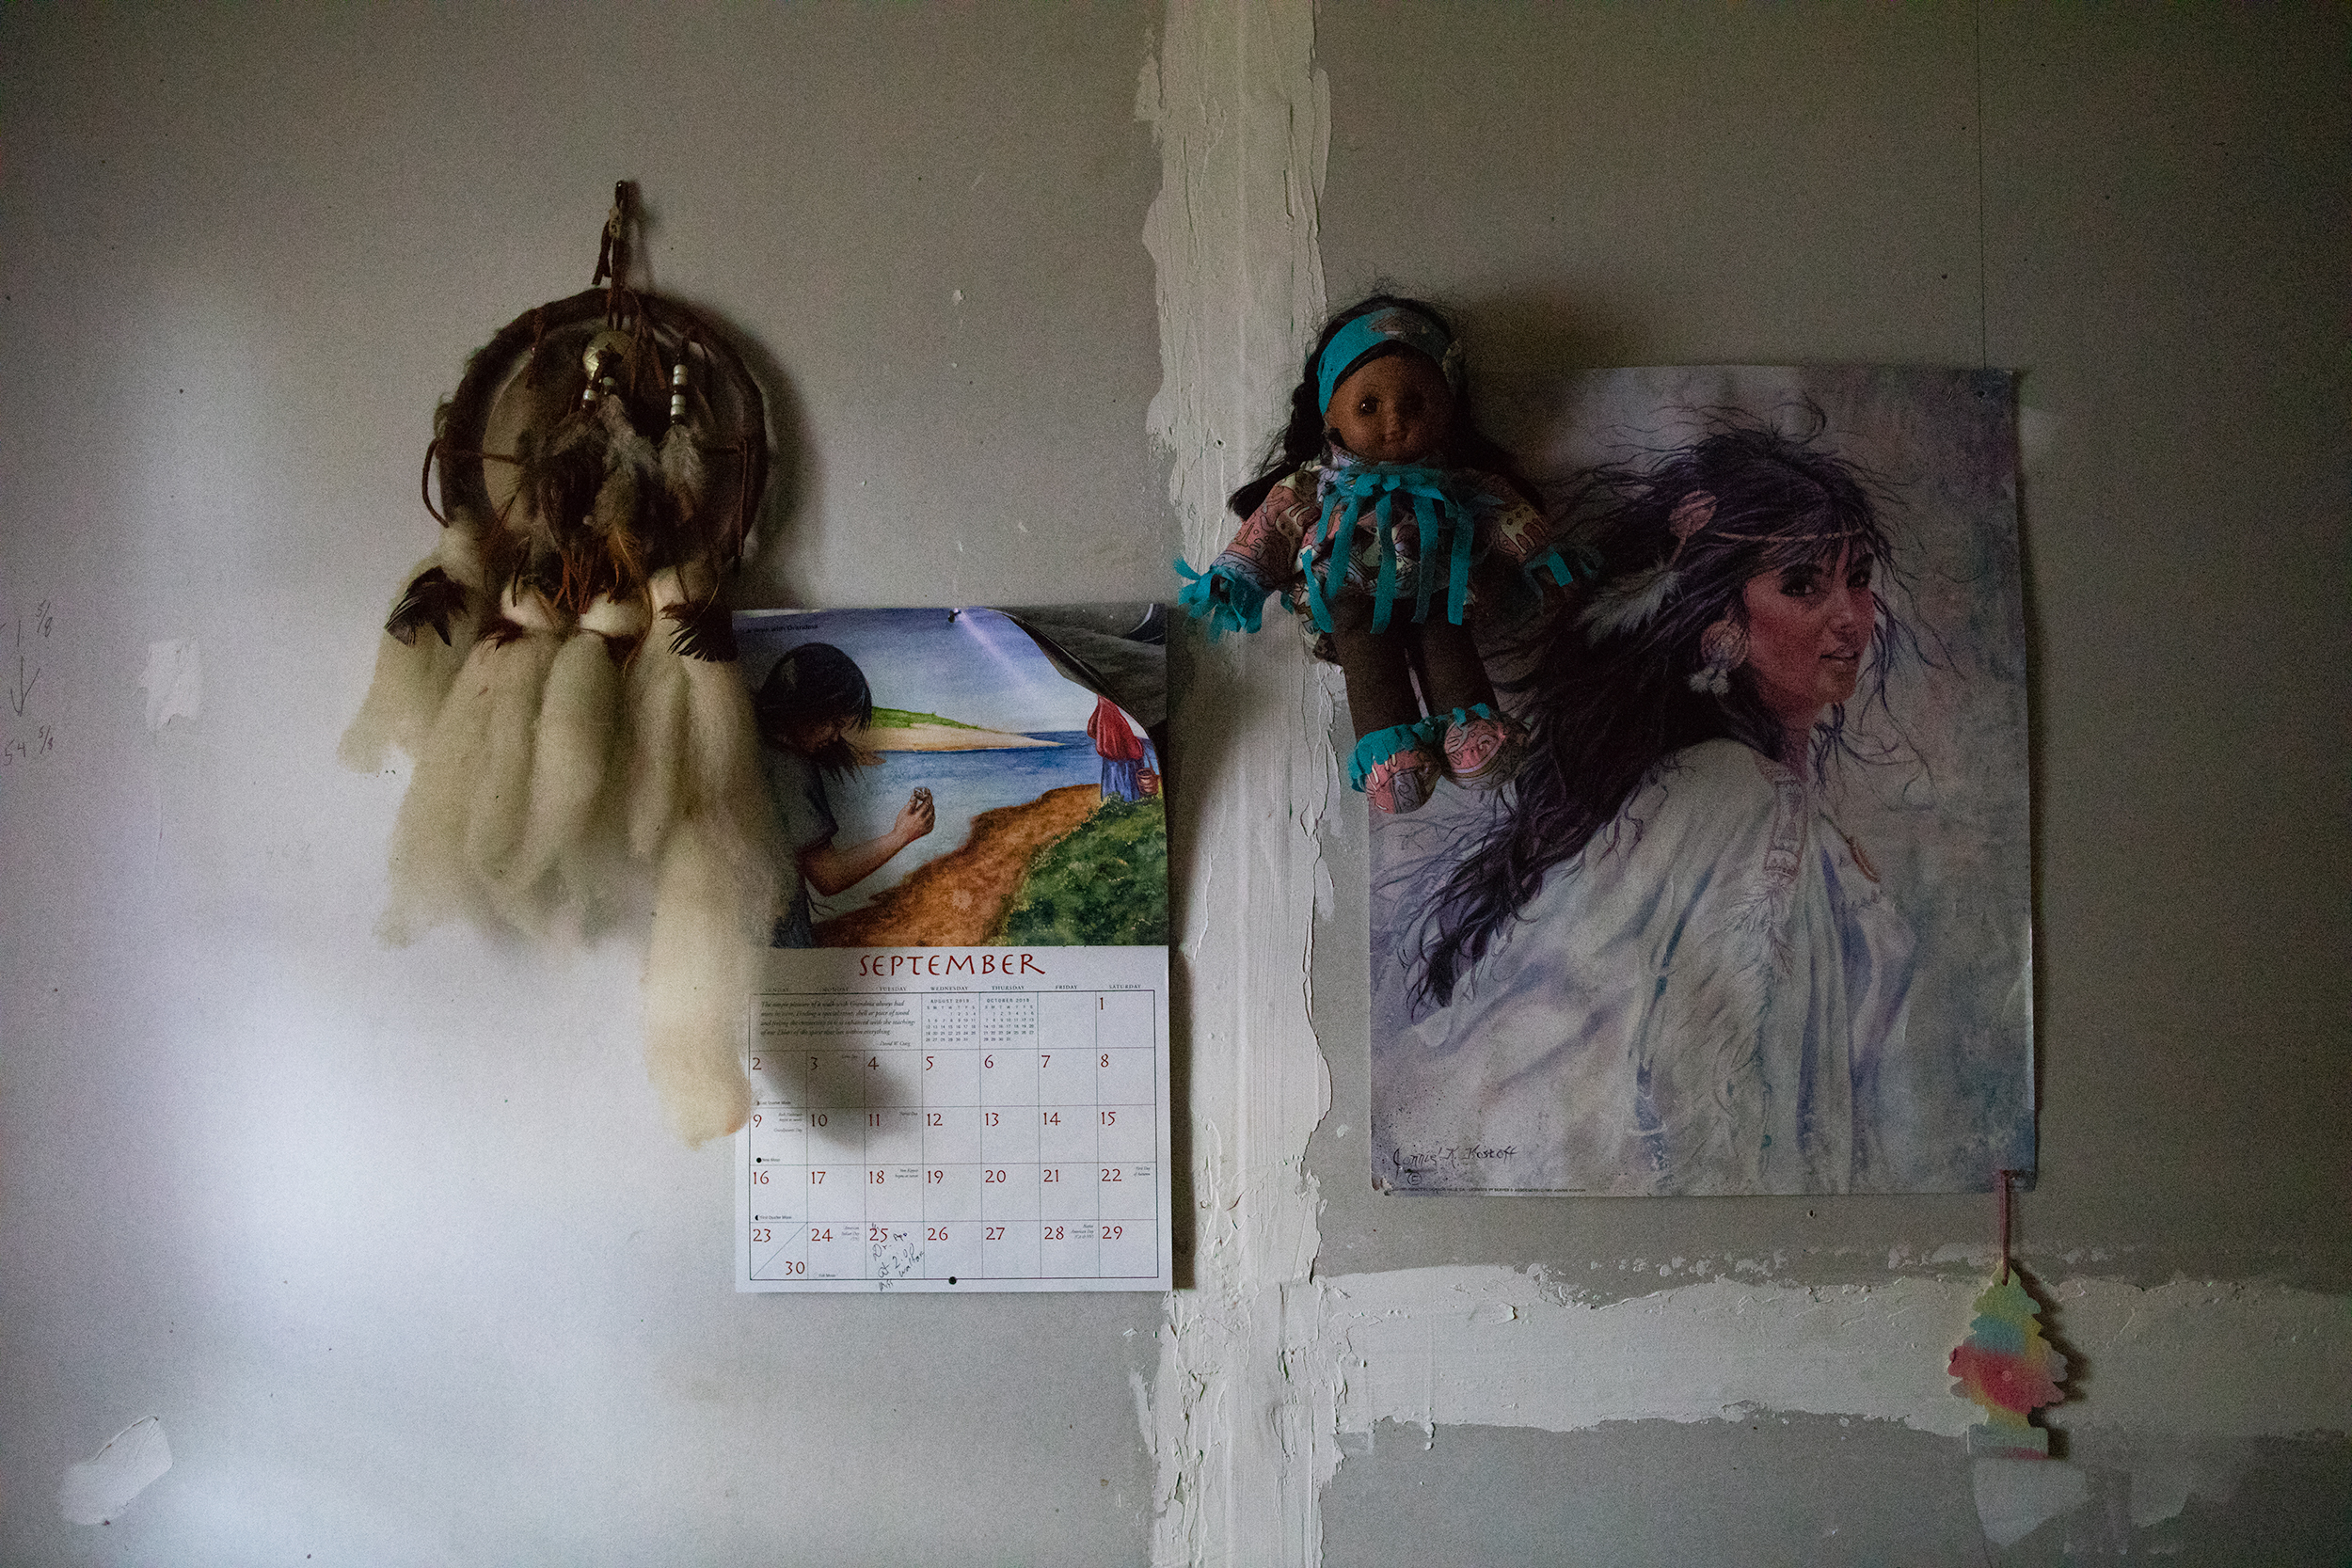  Dreamcatchers and Native American images cover Brenda’s bedroom wall. They are reminders of her biological mother who was part Cherokee. 